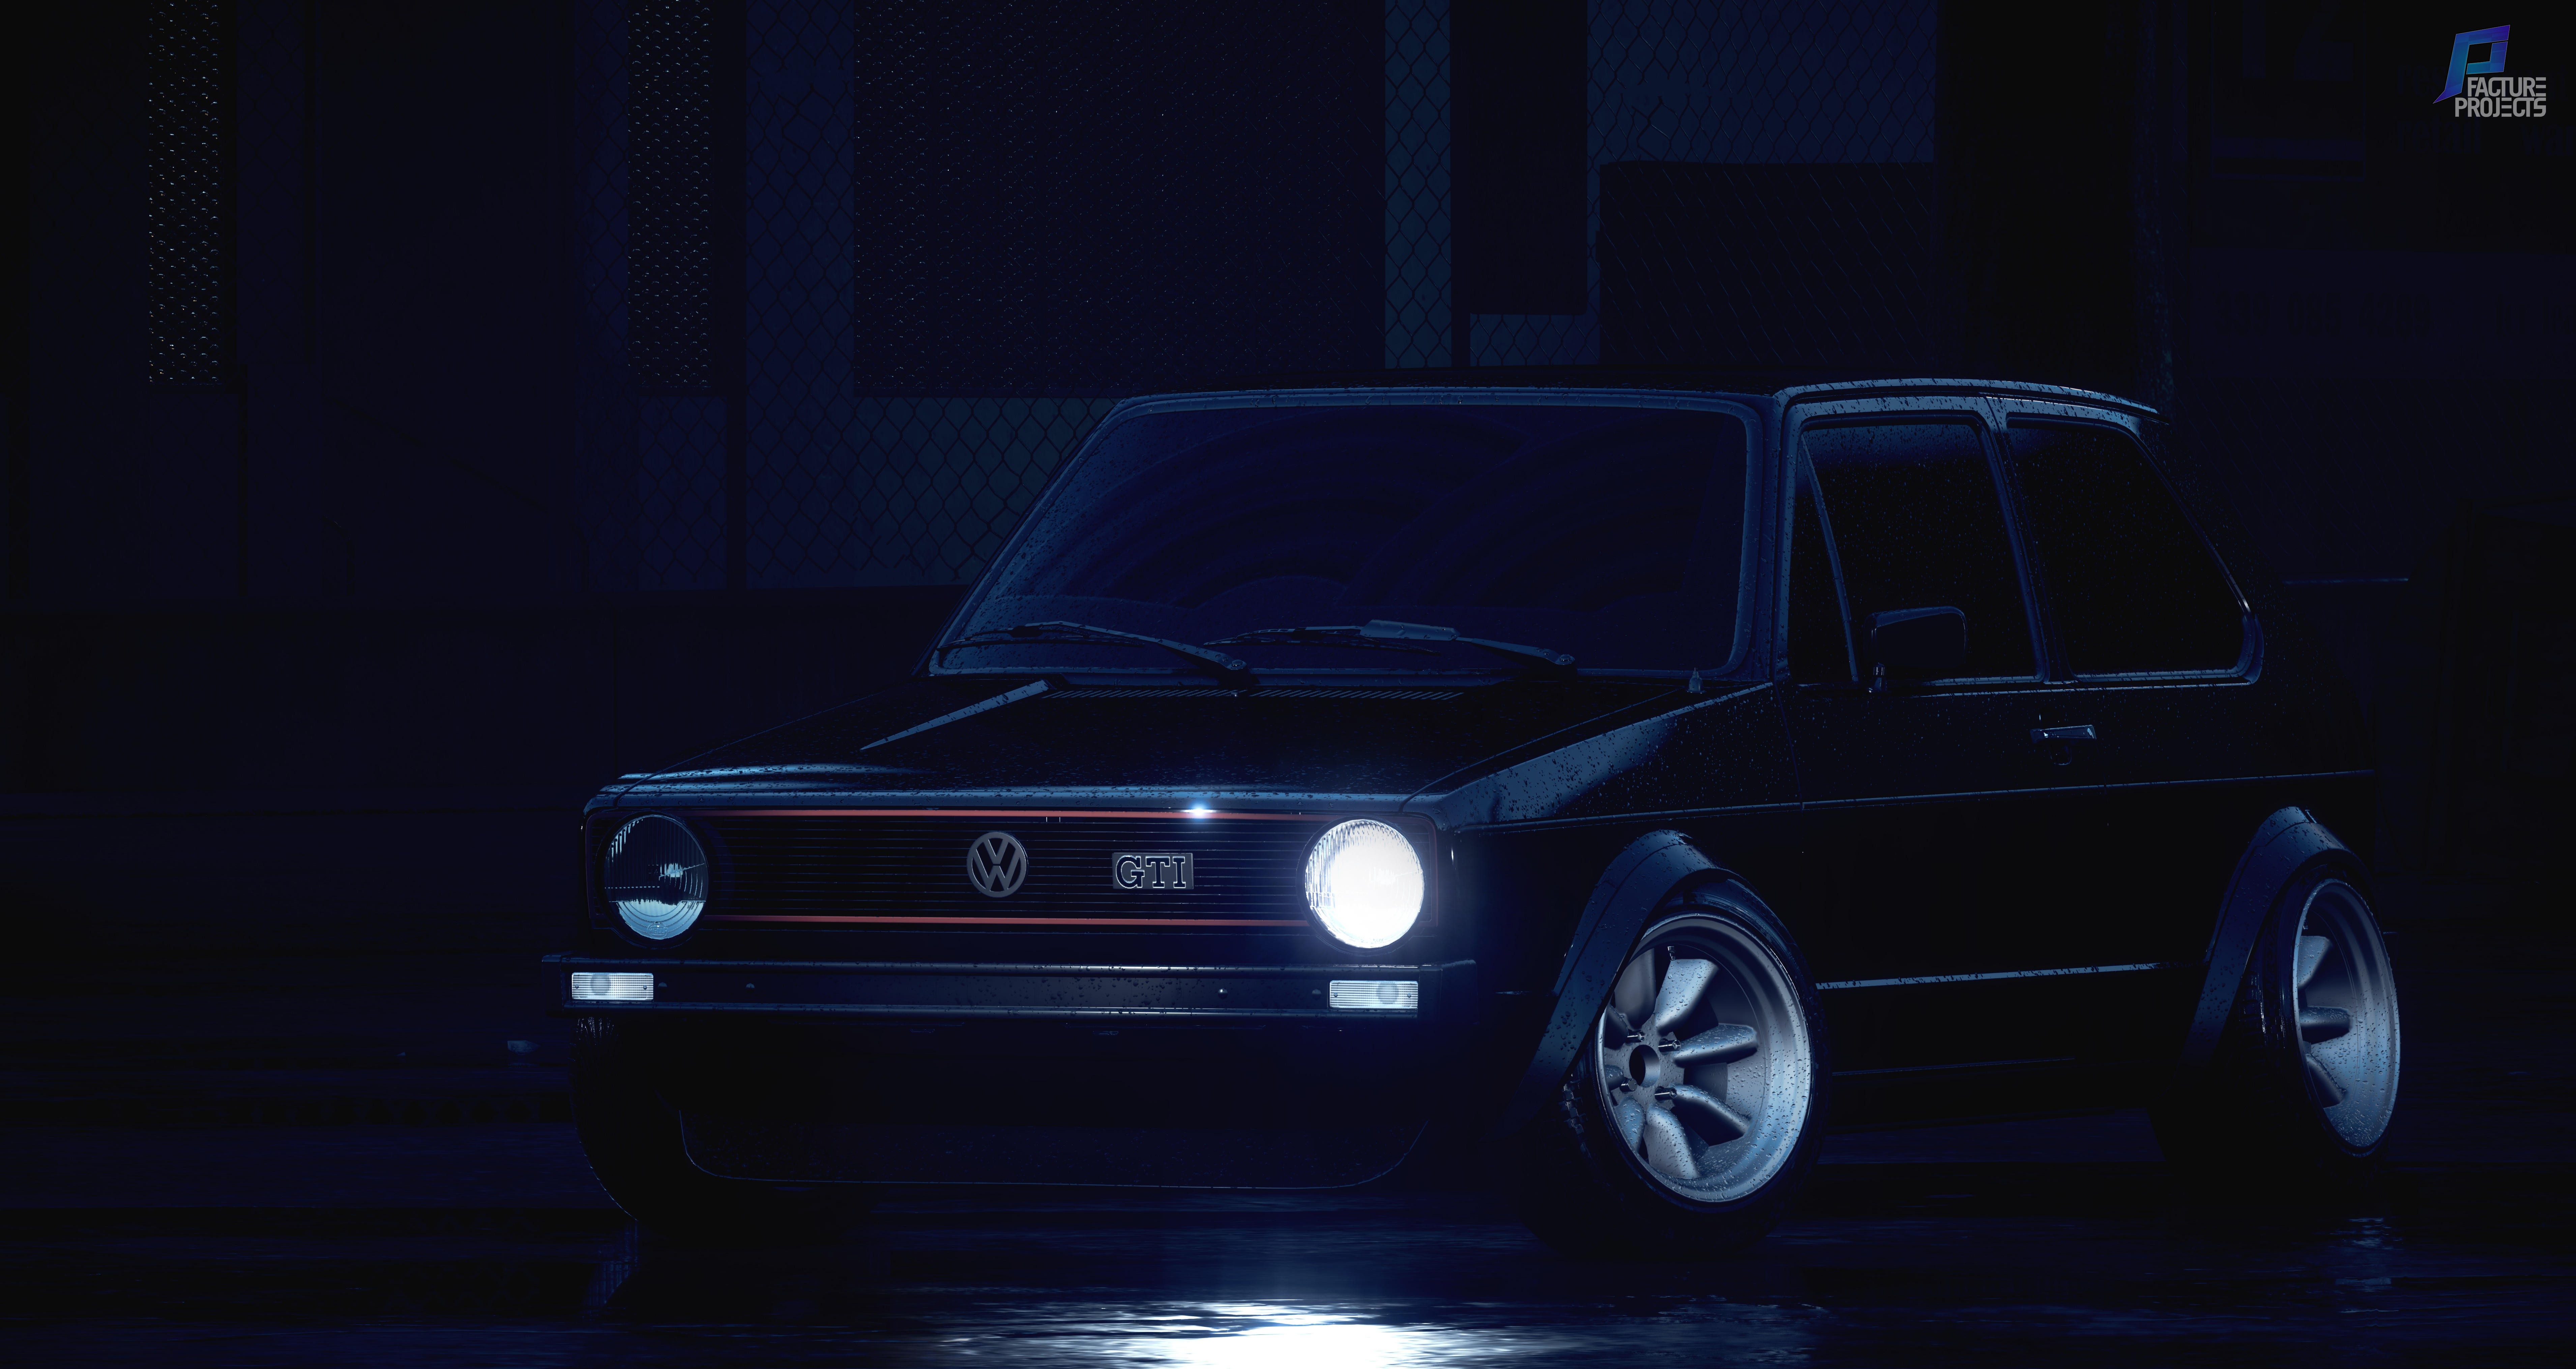 Volkswagen Golf Gti Nfs 8k, HD Cars, 4k Wallpapers, Images, Backgrounds,  Photos and Pictures